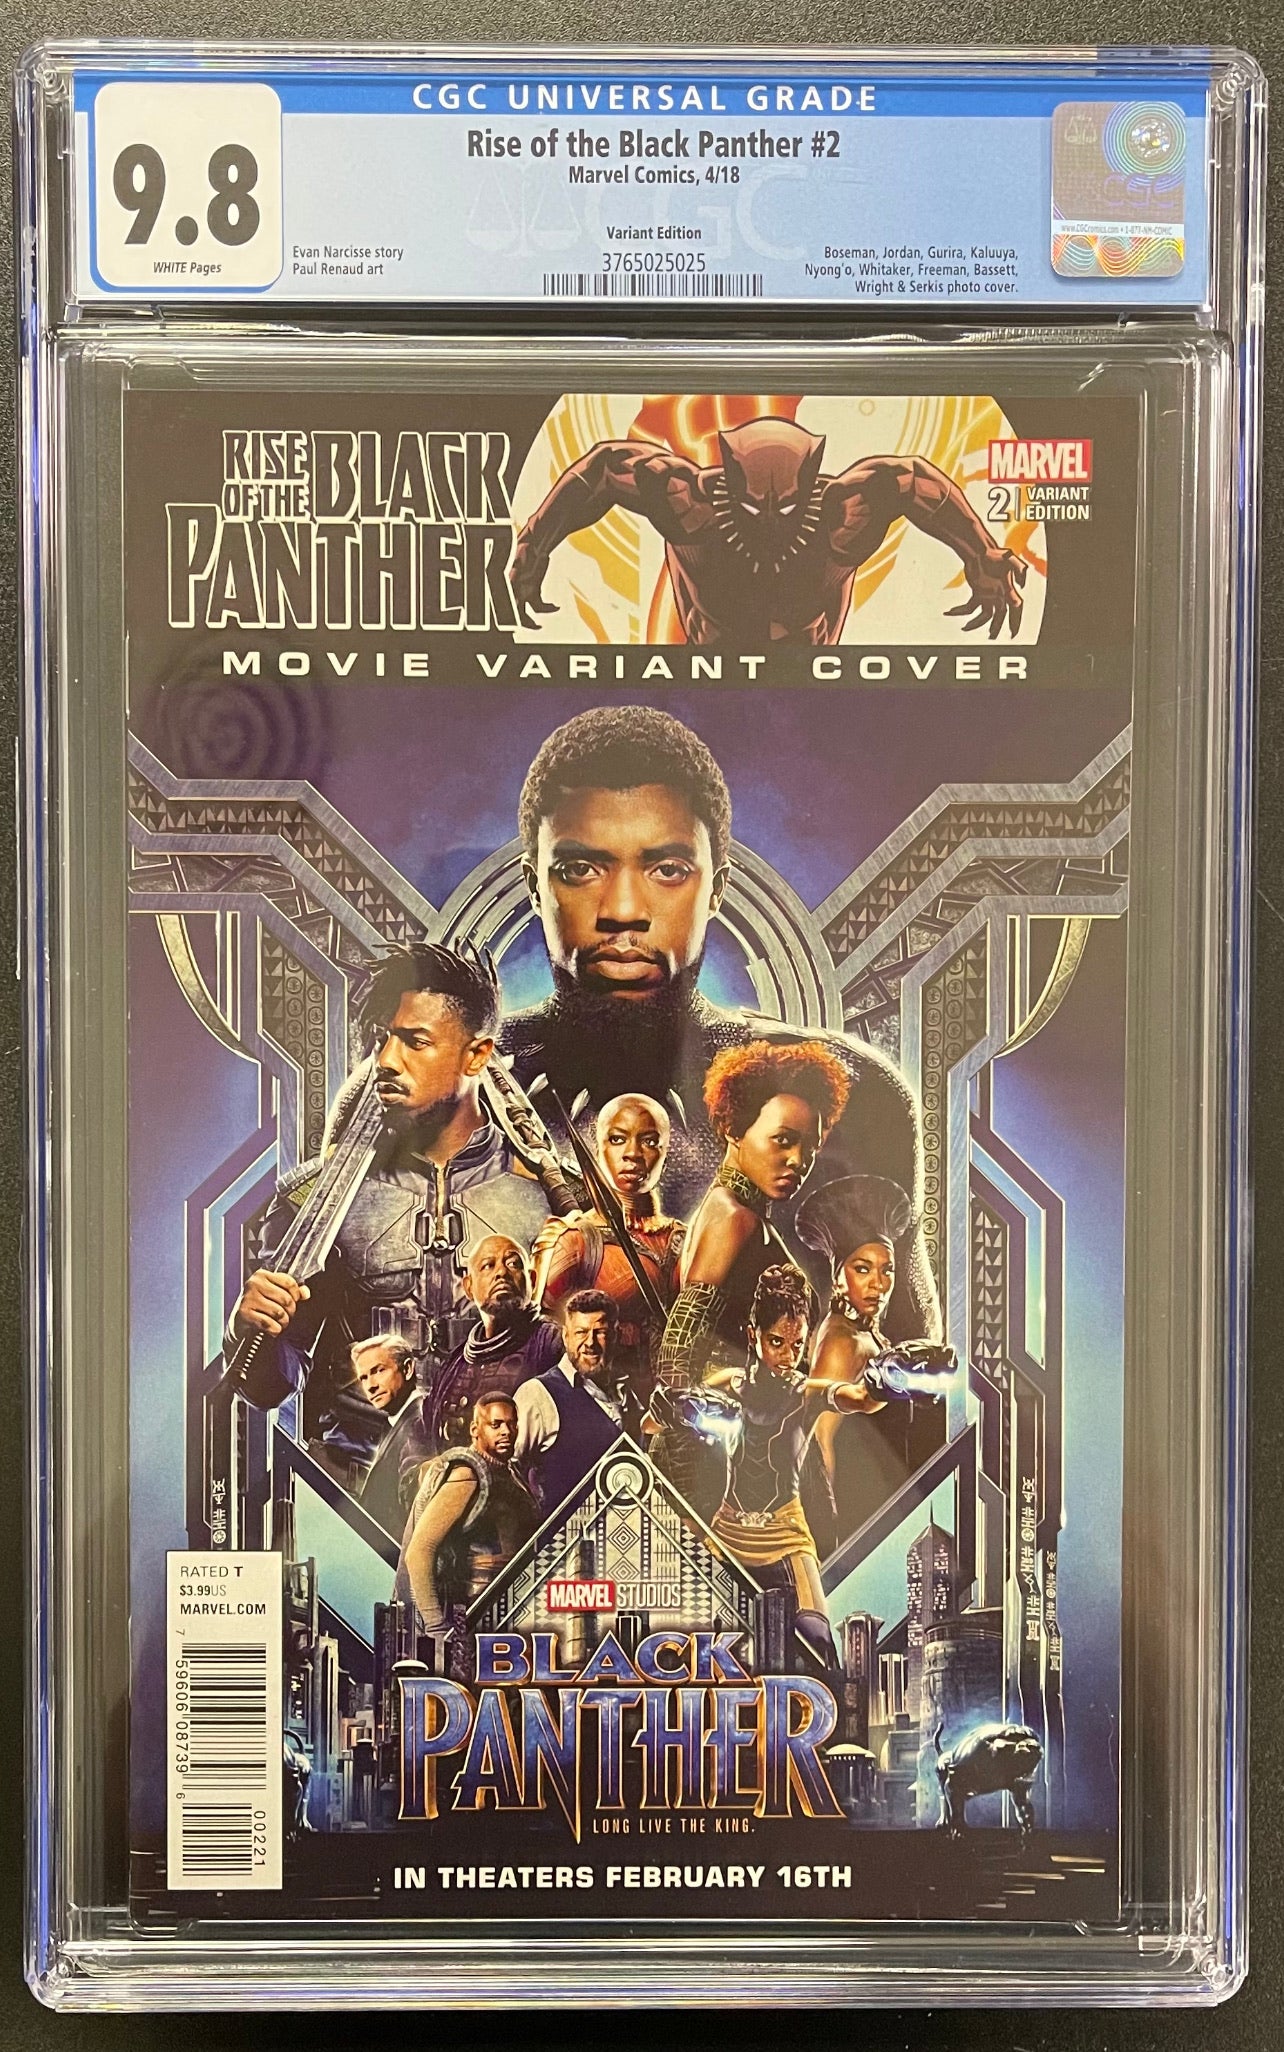 RISE OF THE BLACK PANTHER #2 MOVIE VARIANT COVER CGC 9.8